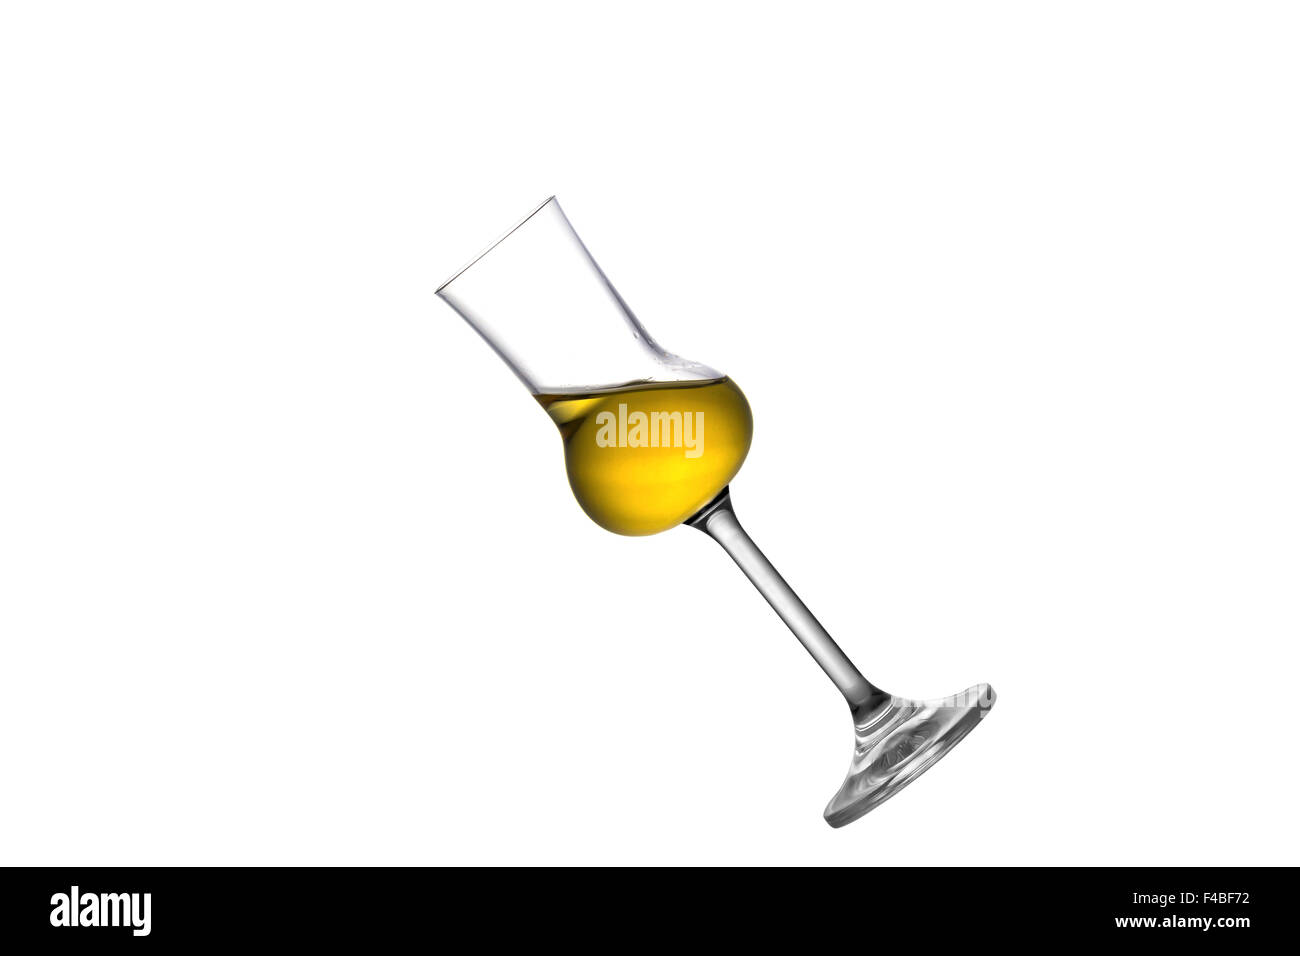 Tilted red wine glass – License image – 11248000 ❘ Image Professionals